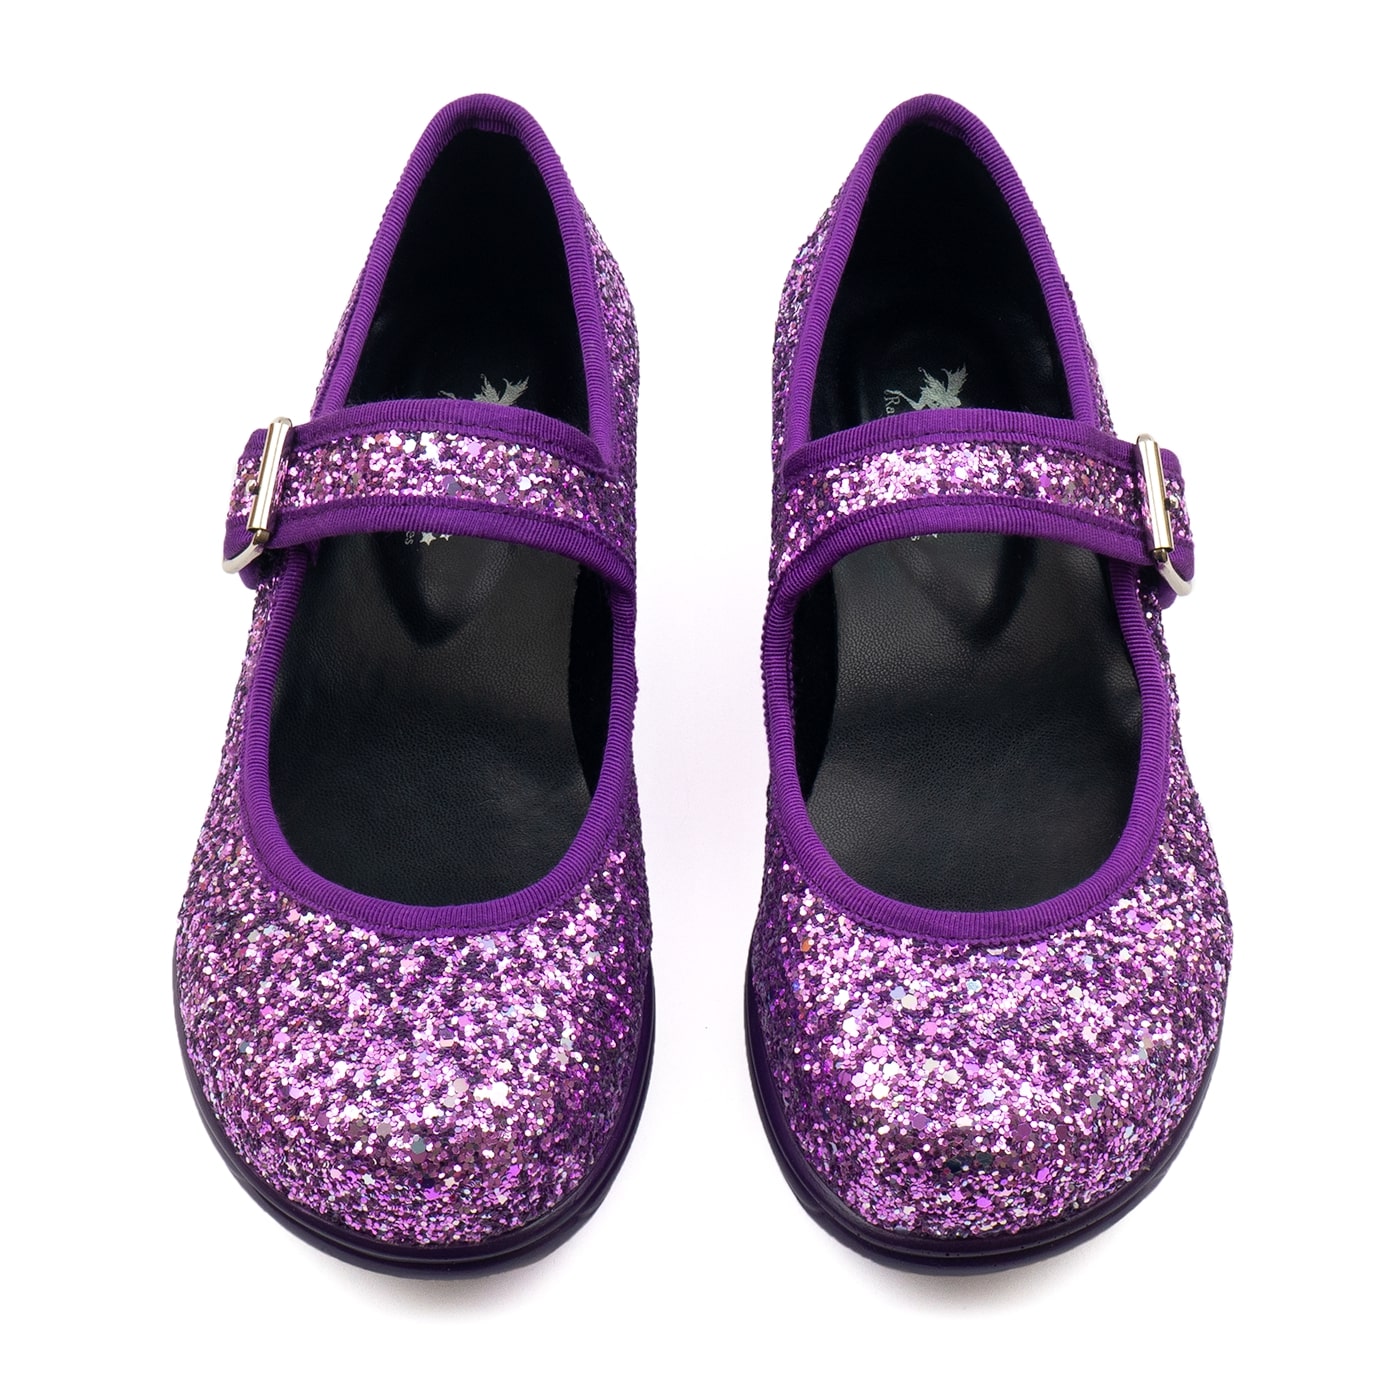 Amethyst Mary Janes by RainbowsAndFairies.com (Purple Glitter - Sparkle - Shoes - Buckle Up - Lilac) - SKU: FW_MARYJ_AMTHS_ORG - Pic 02